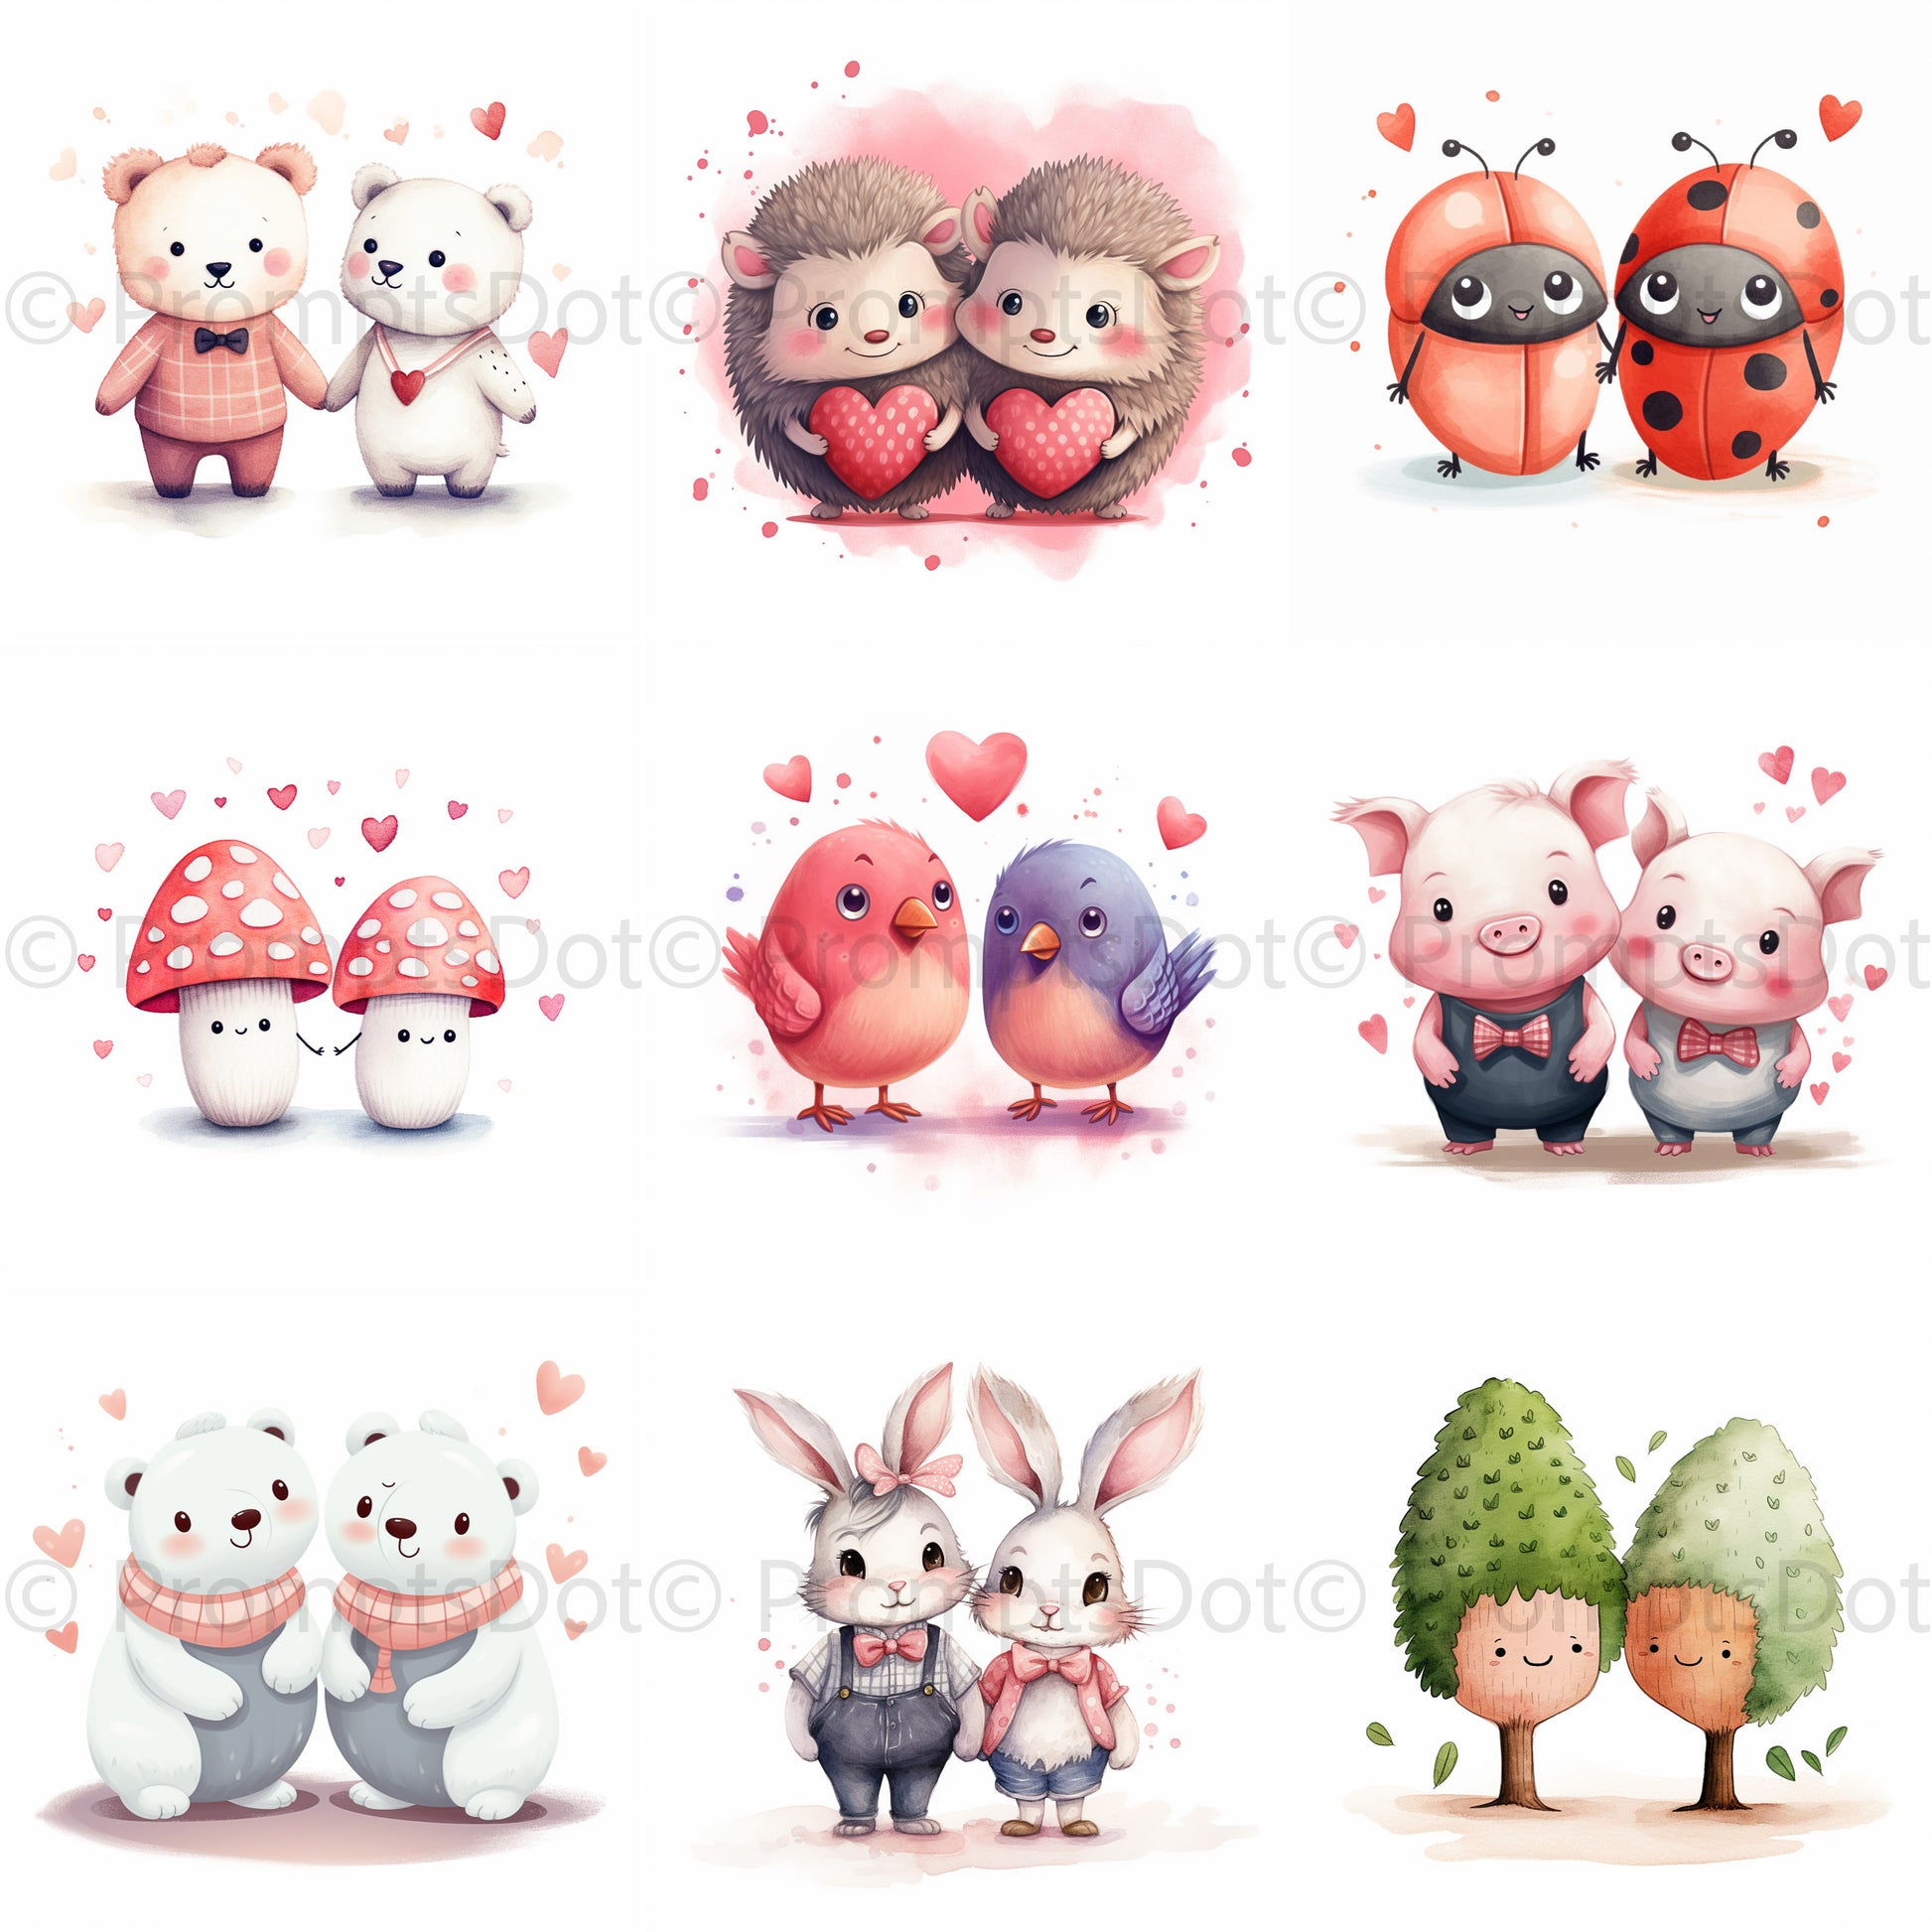 Cute Animals Couples In Love Nursery Art Midjourney Prompt Commercial Use